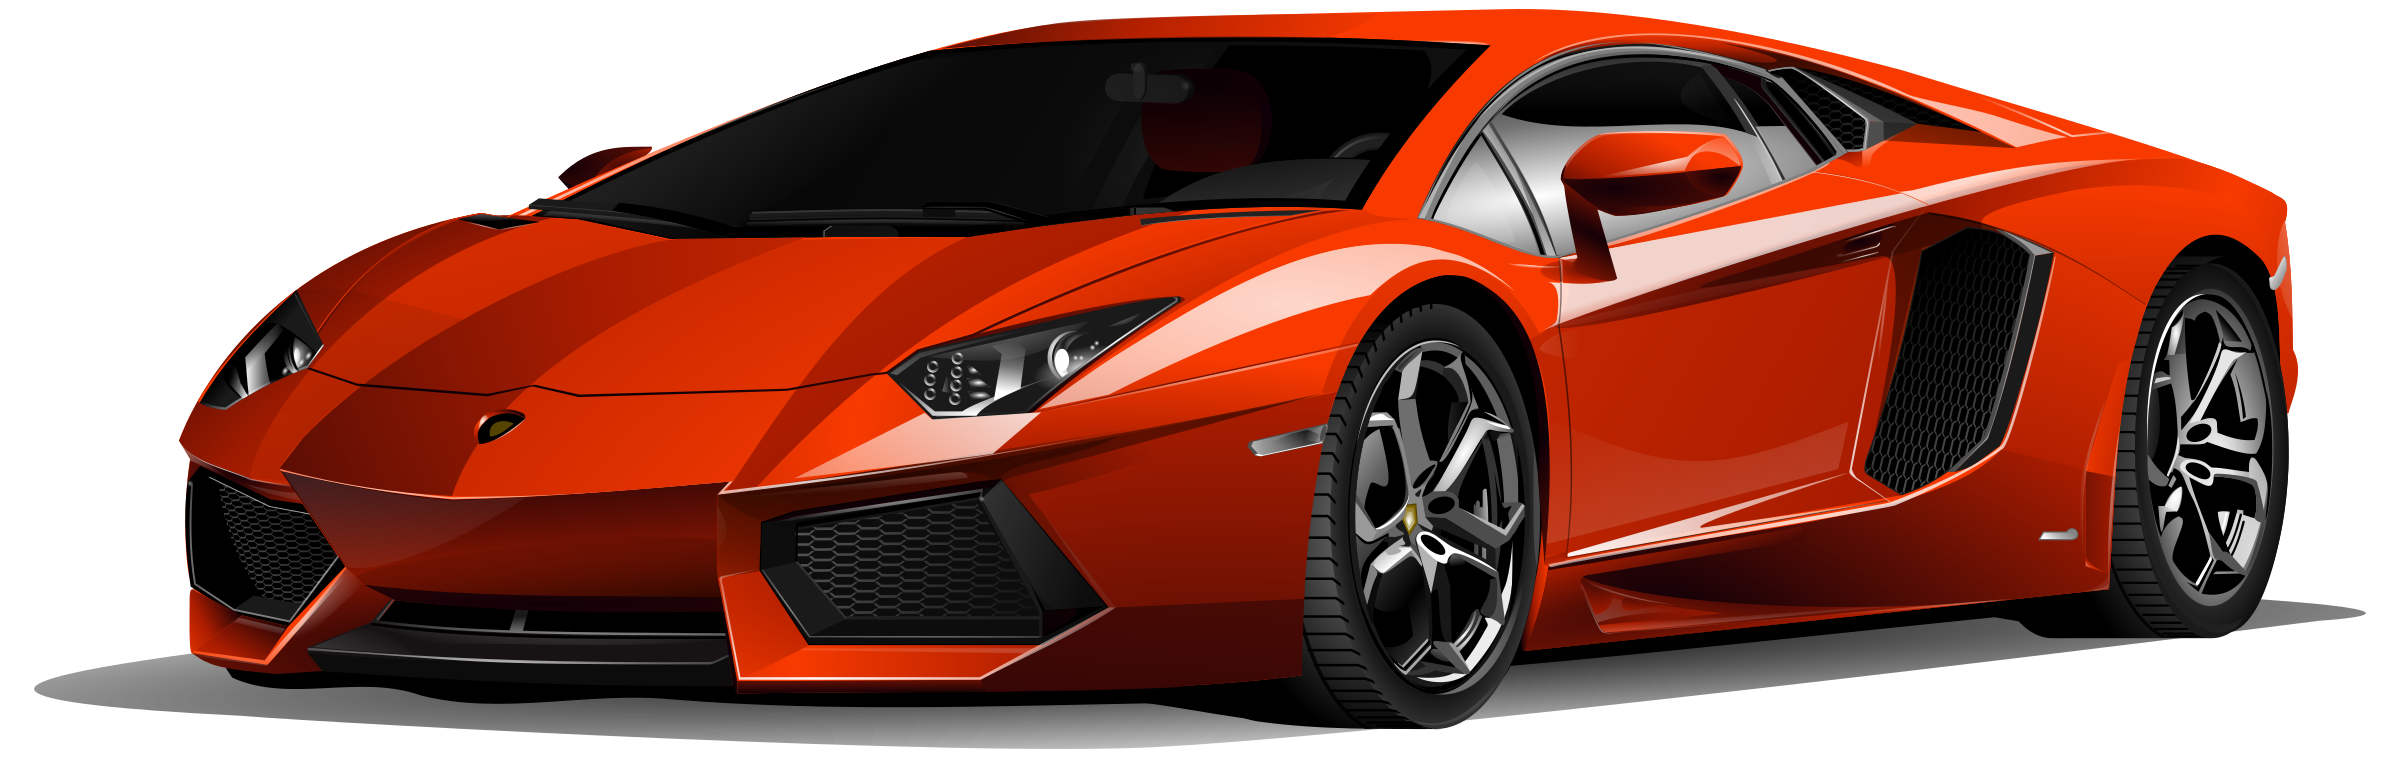 clipart cars red